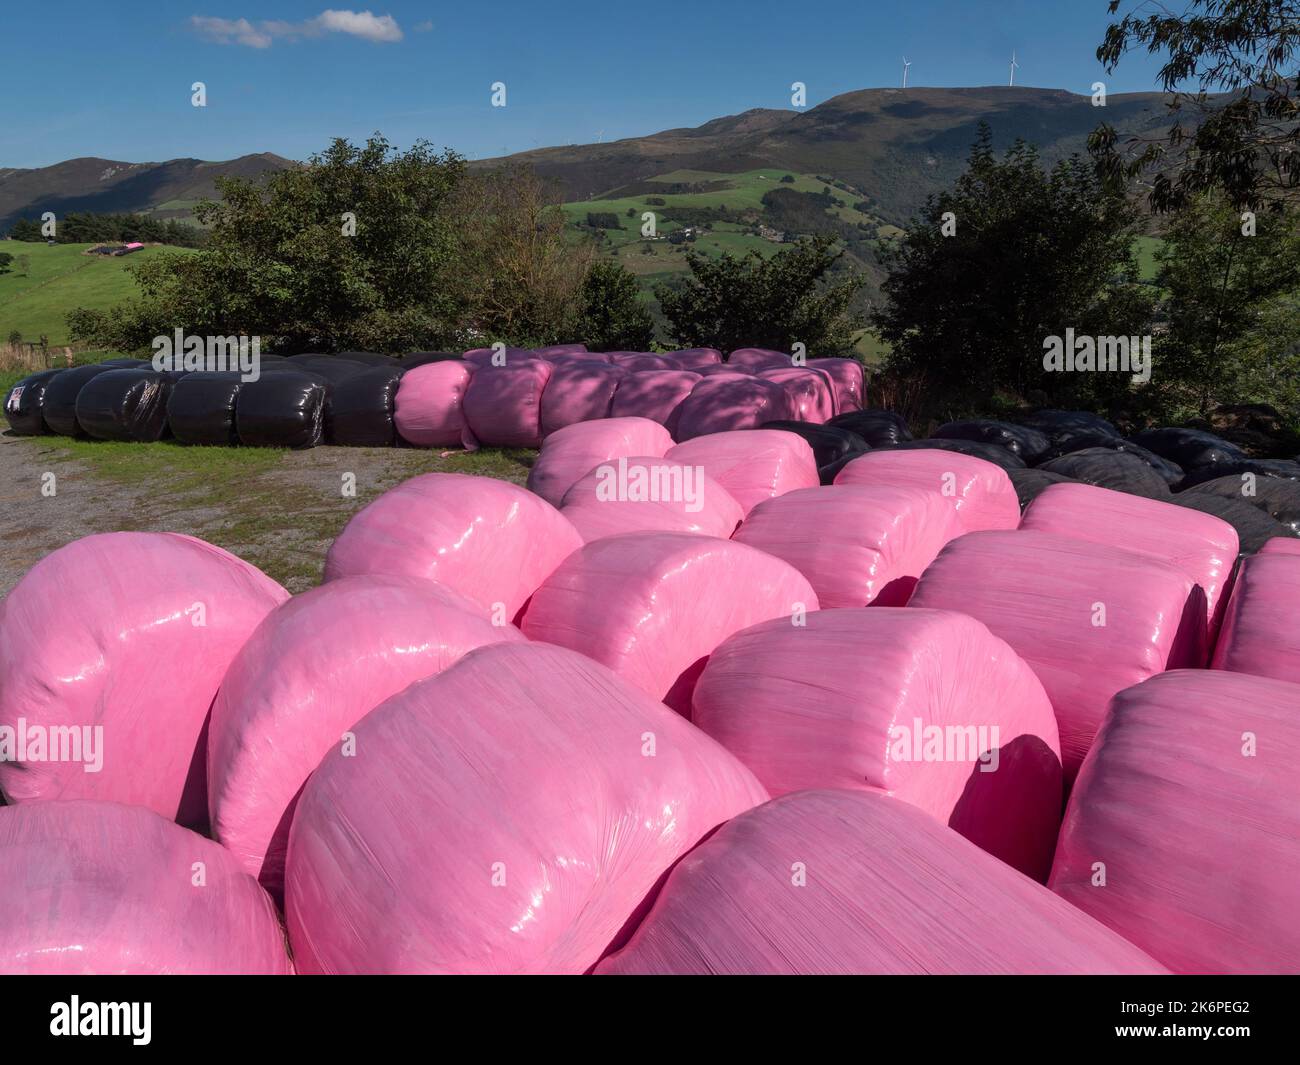 Black and pink bales of hay wraped in plastic and lush green countryside in the background. Stock Photo